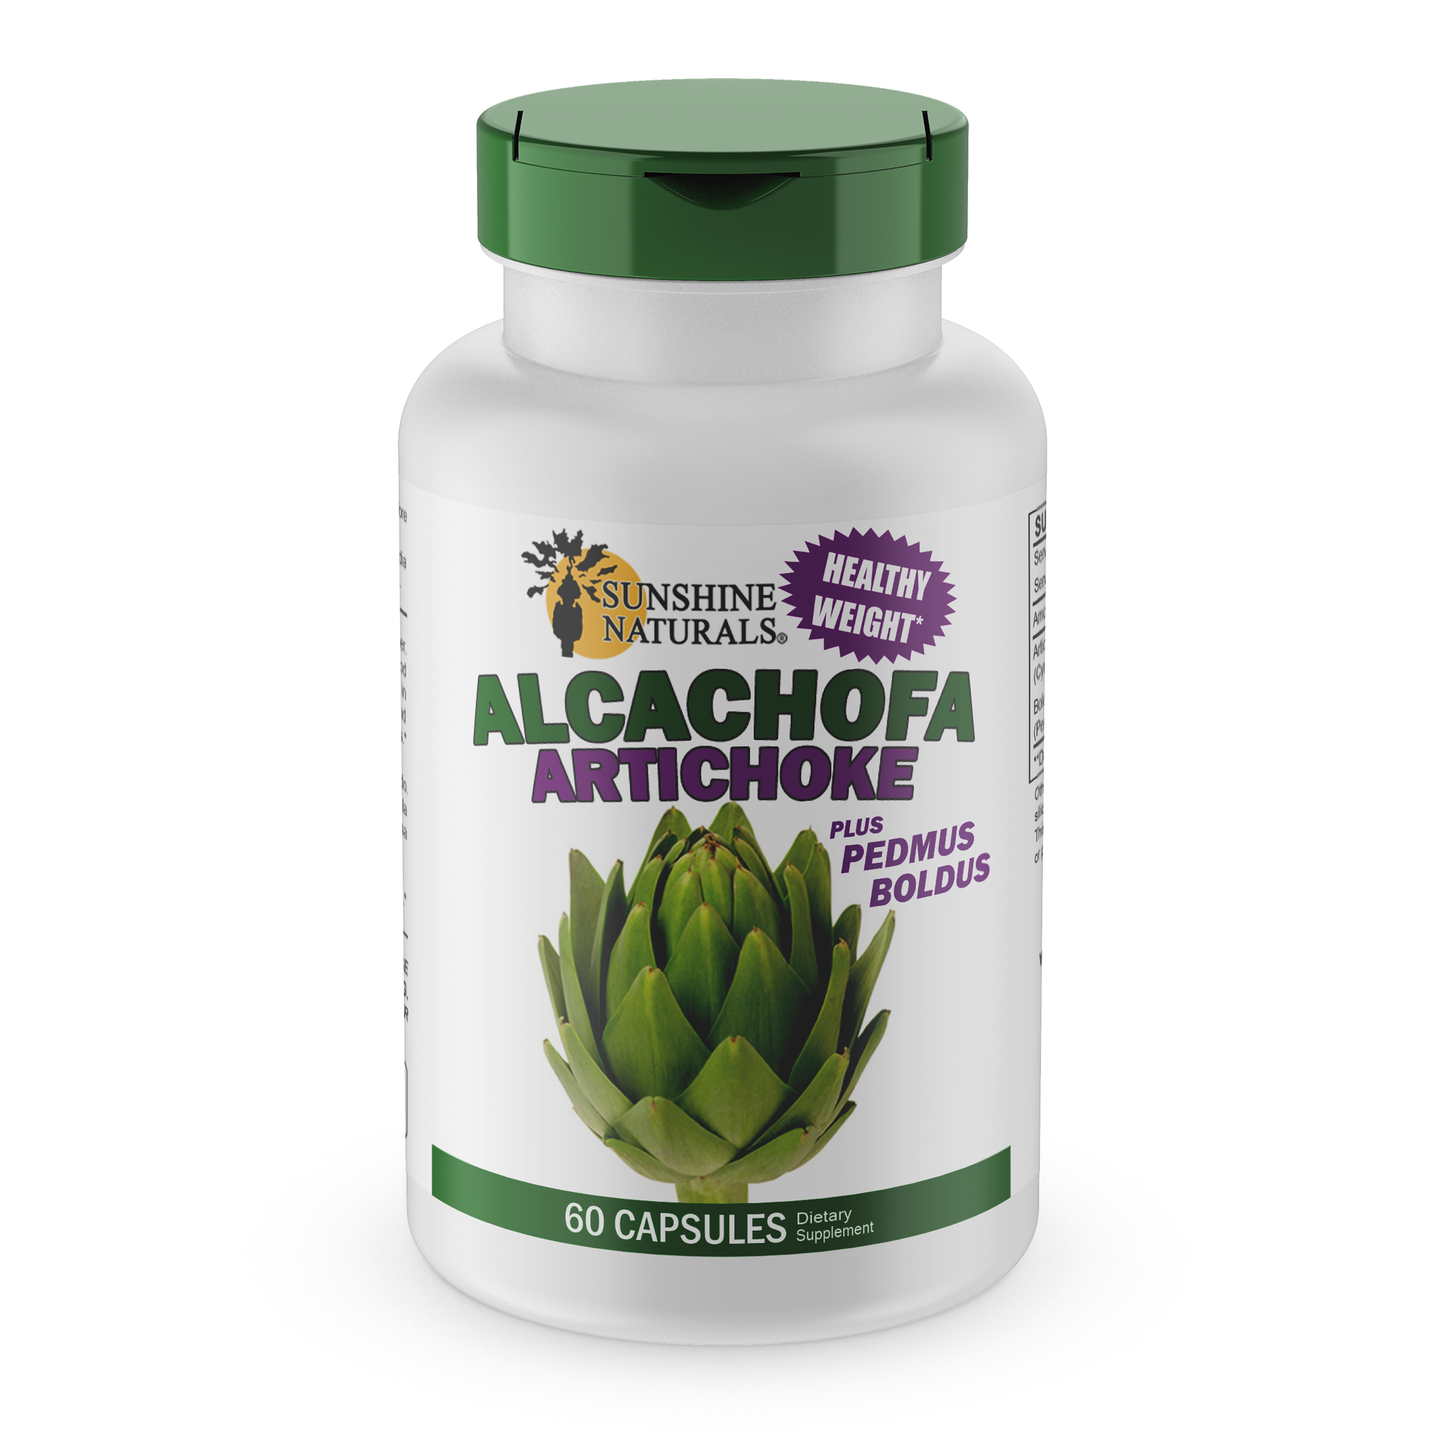 Sunshine Naturals Artichoke Supplement. Weight Loss and Liver Support. 60 Caps